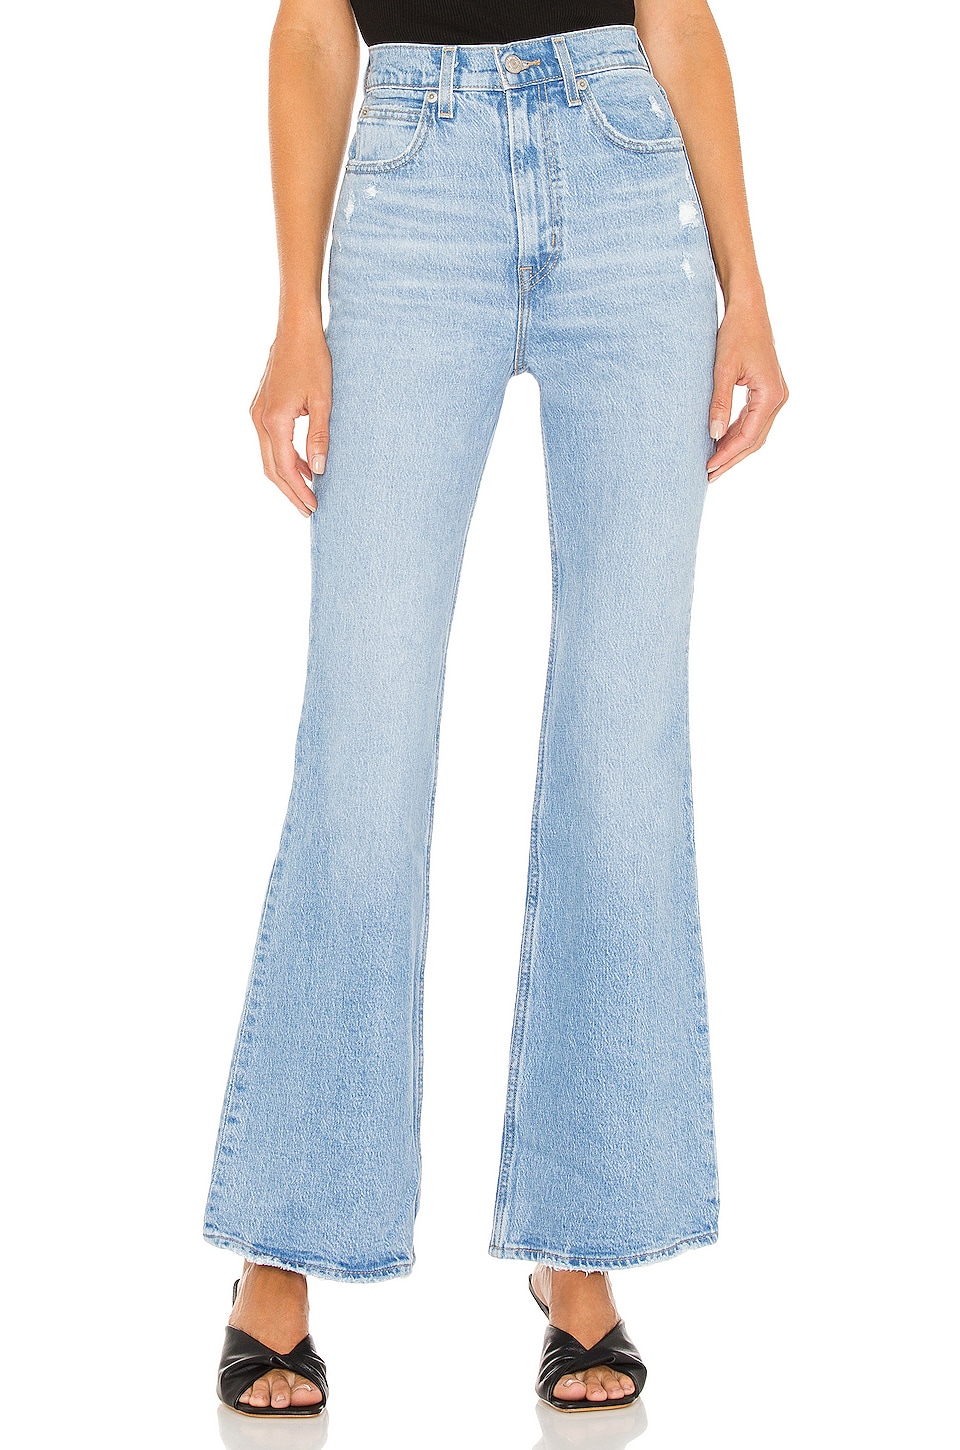 LEVI'S 70s High Rise Flare Jean in Marine Babe | REVOLVE